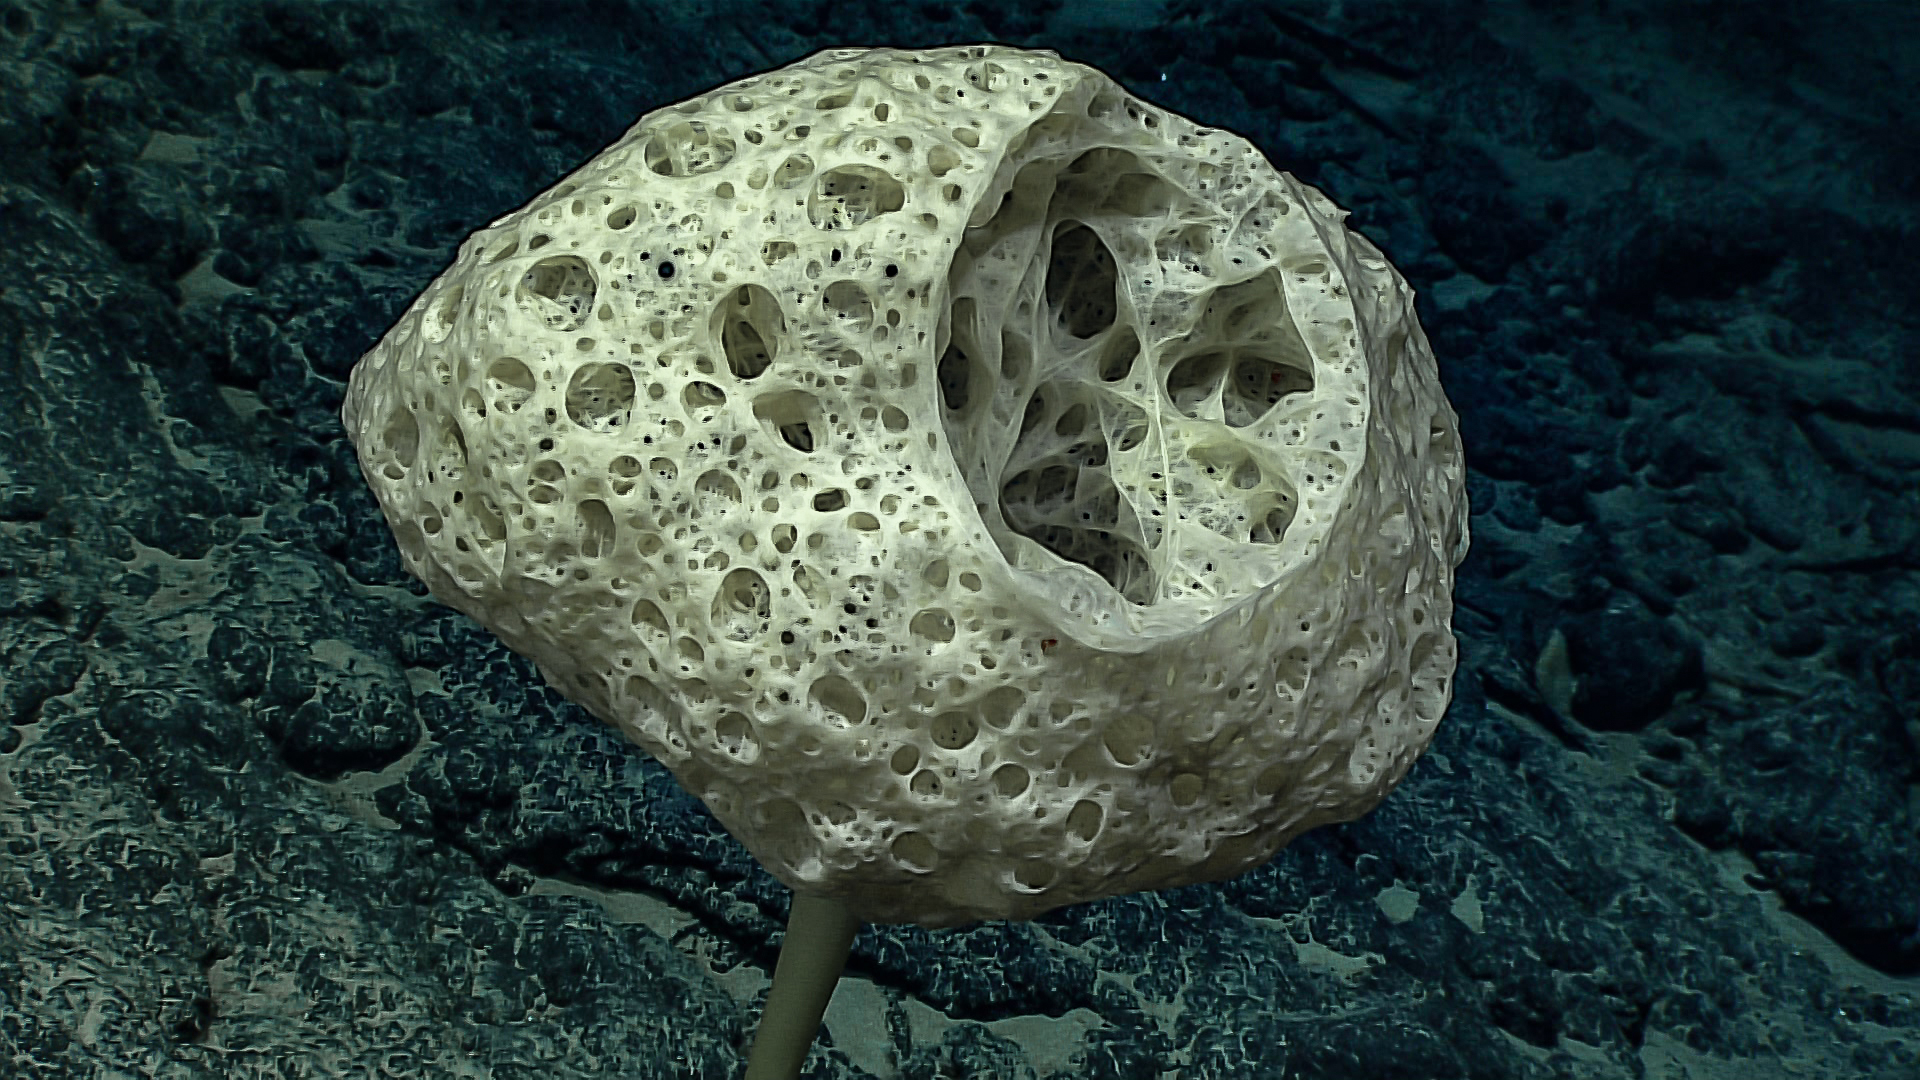 A pale yellow hard coral or sponge like creature with holes all over it, and a cutout section showing more holes inside